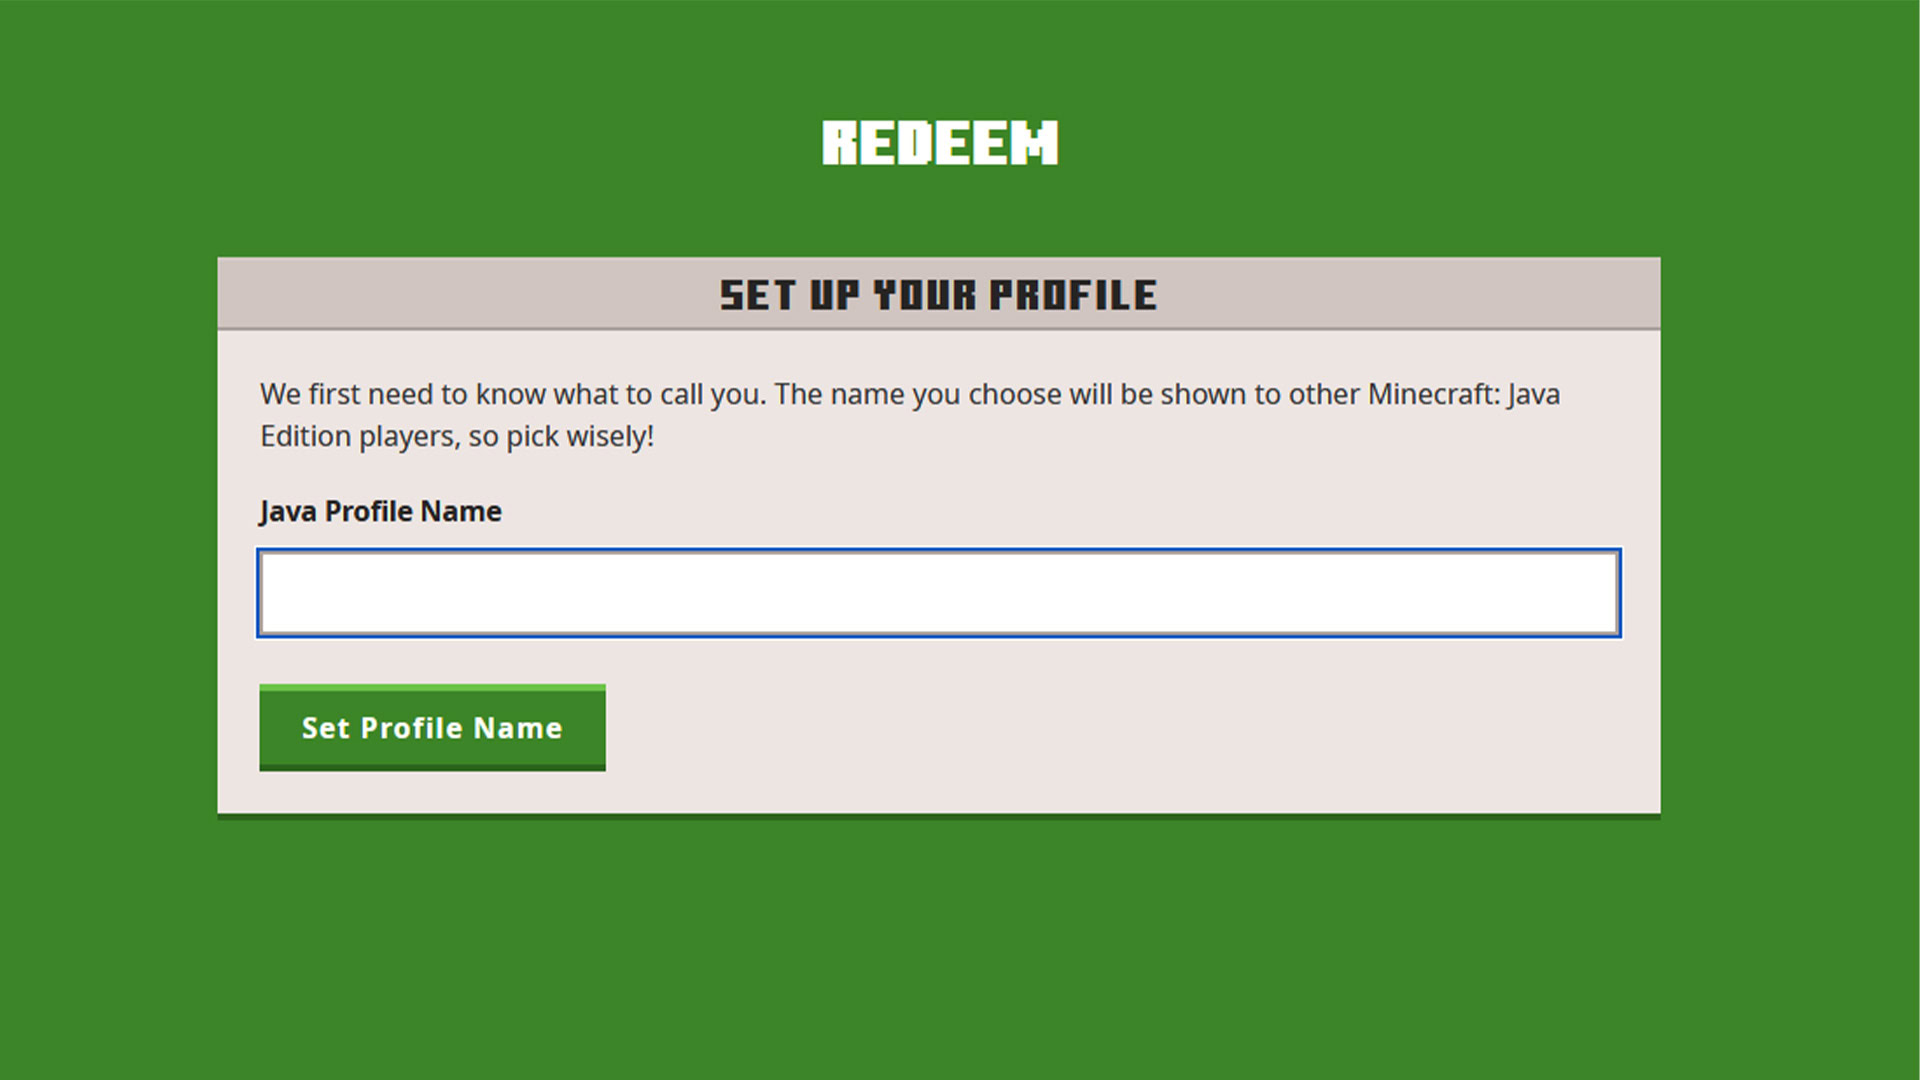 How to Change Your Minecraft Username